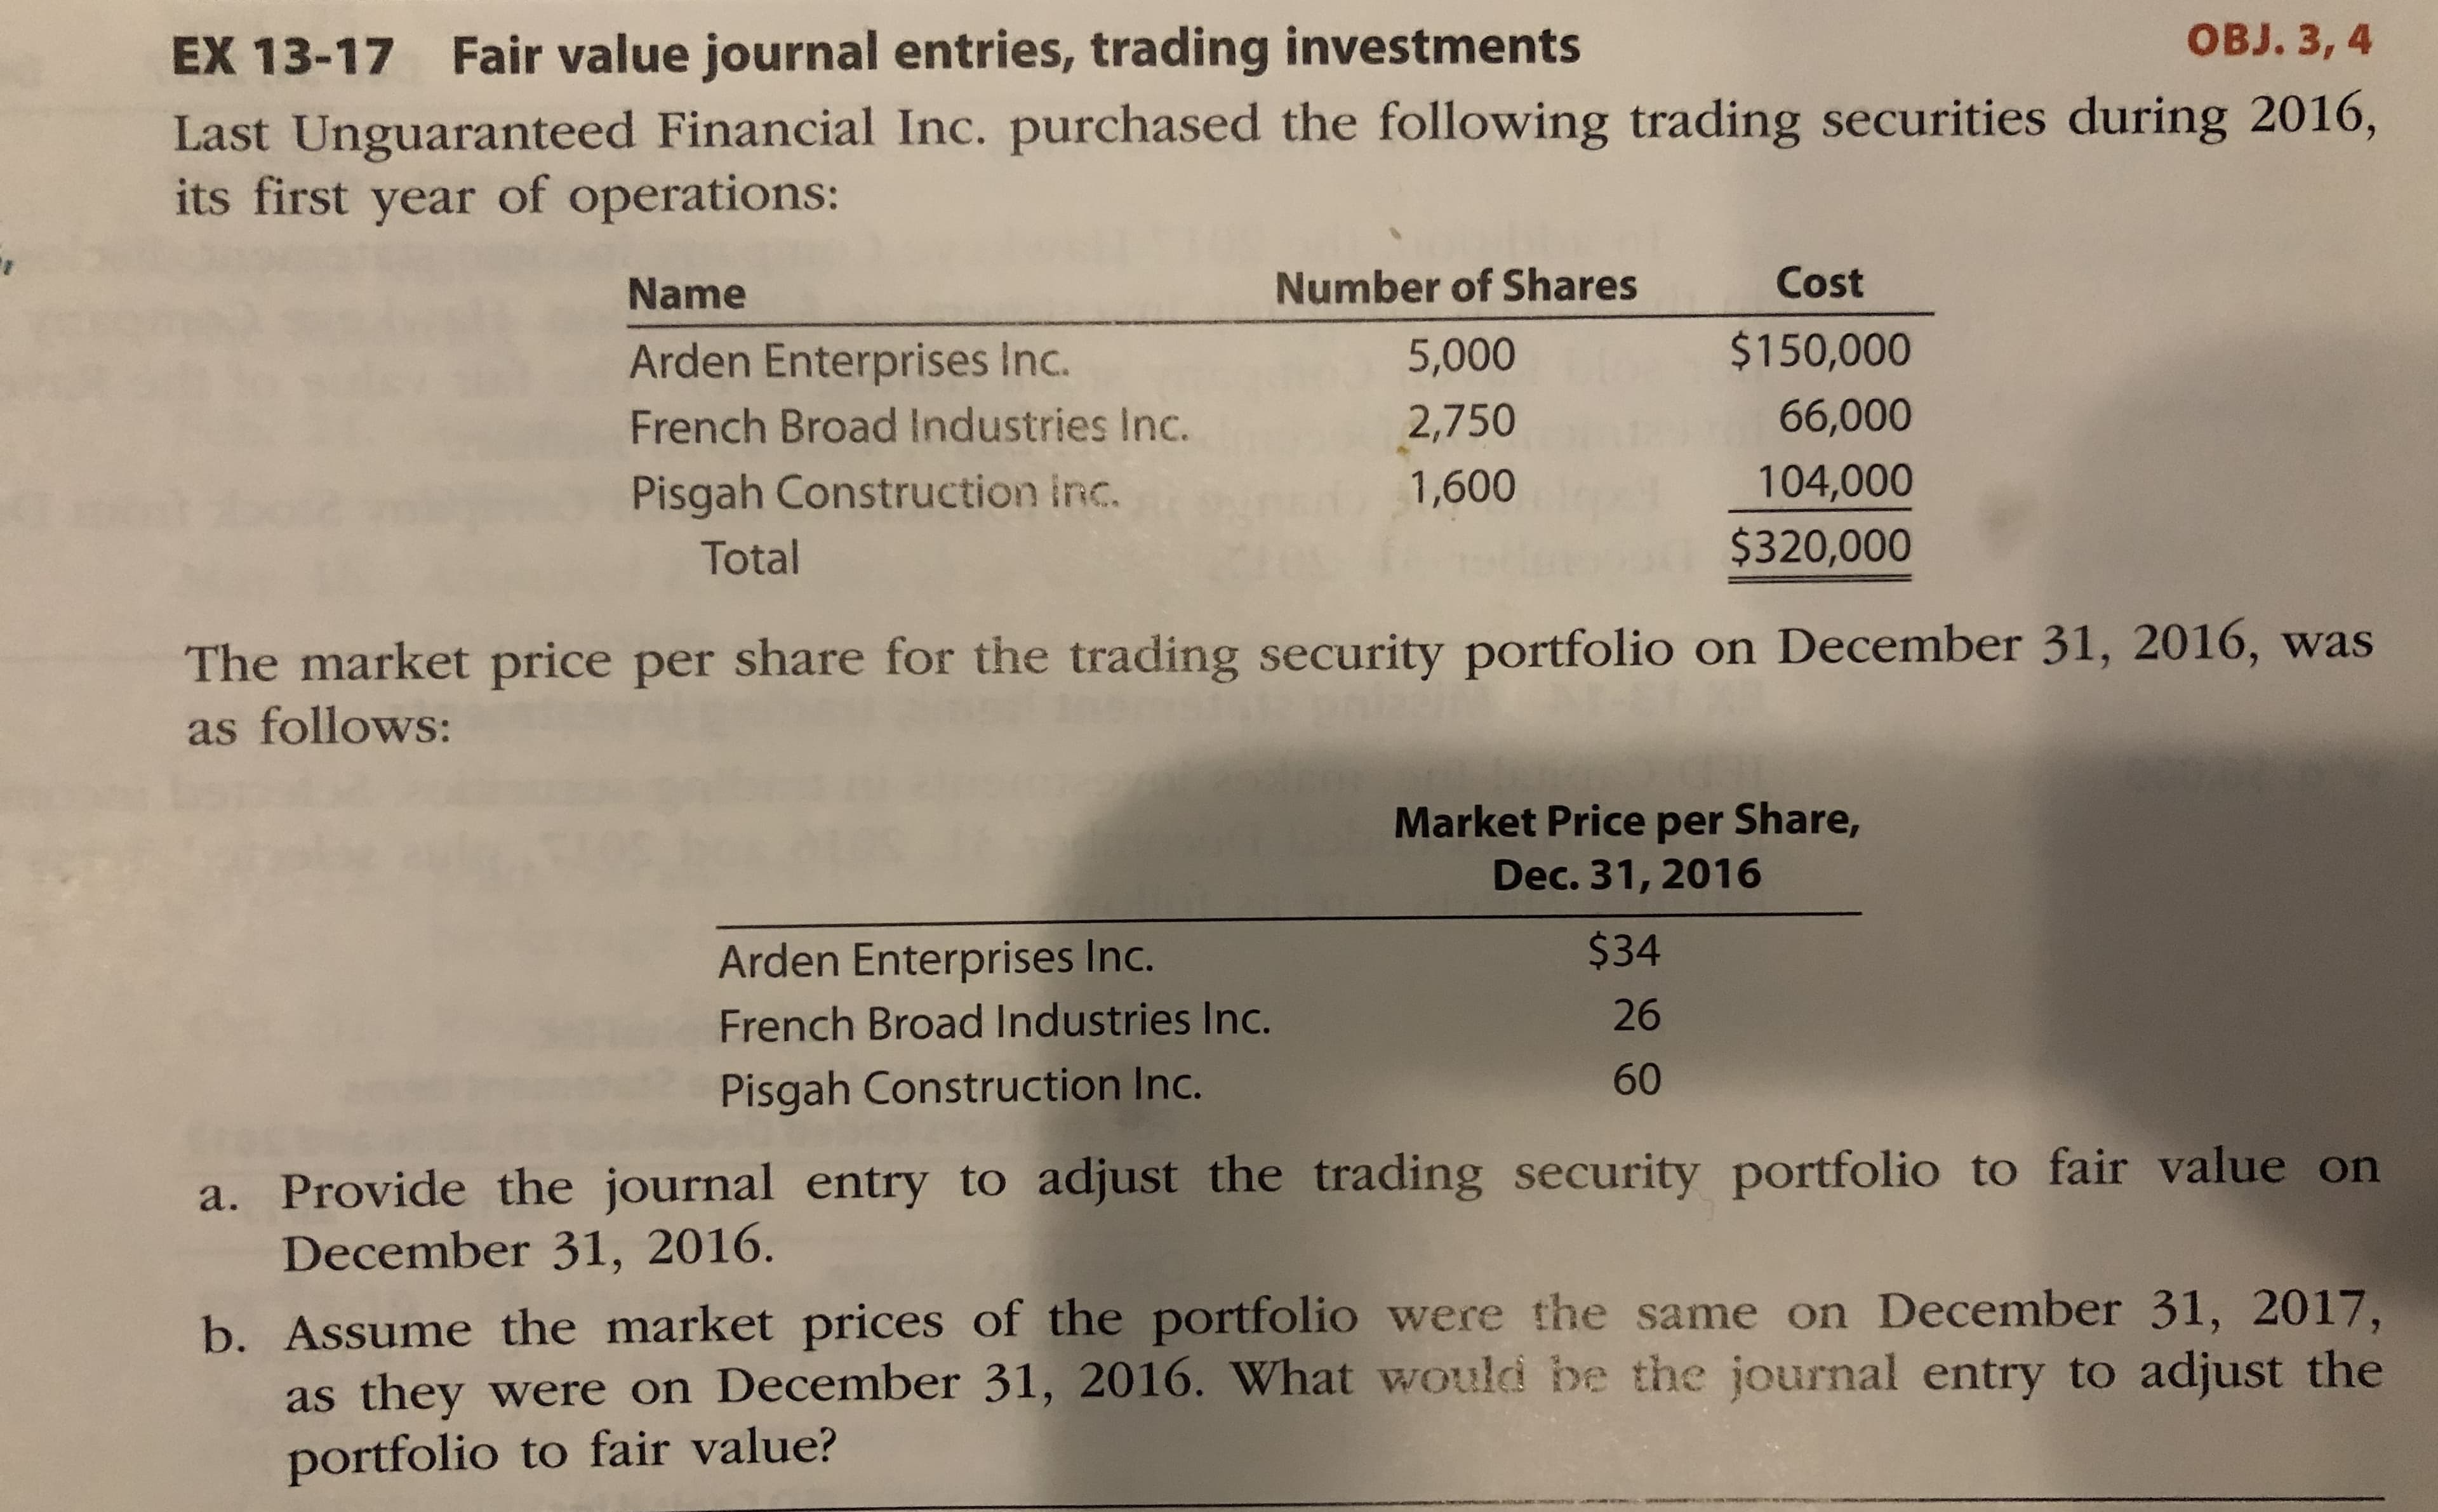 a. Provide the journal entry to adjust the trading security portfolio to fair value on
December 31, 2016.
b. Assume the market prices of the portfolio were the same on December 31, 2017,
as they were on December 31, 2016. What would be the journal entry to adjust the
portfolio to fair value?
